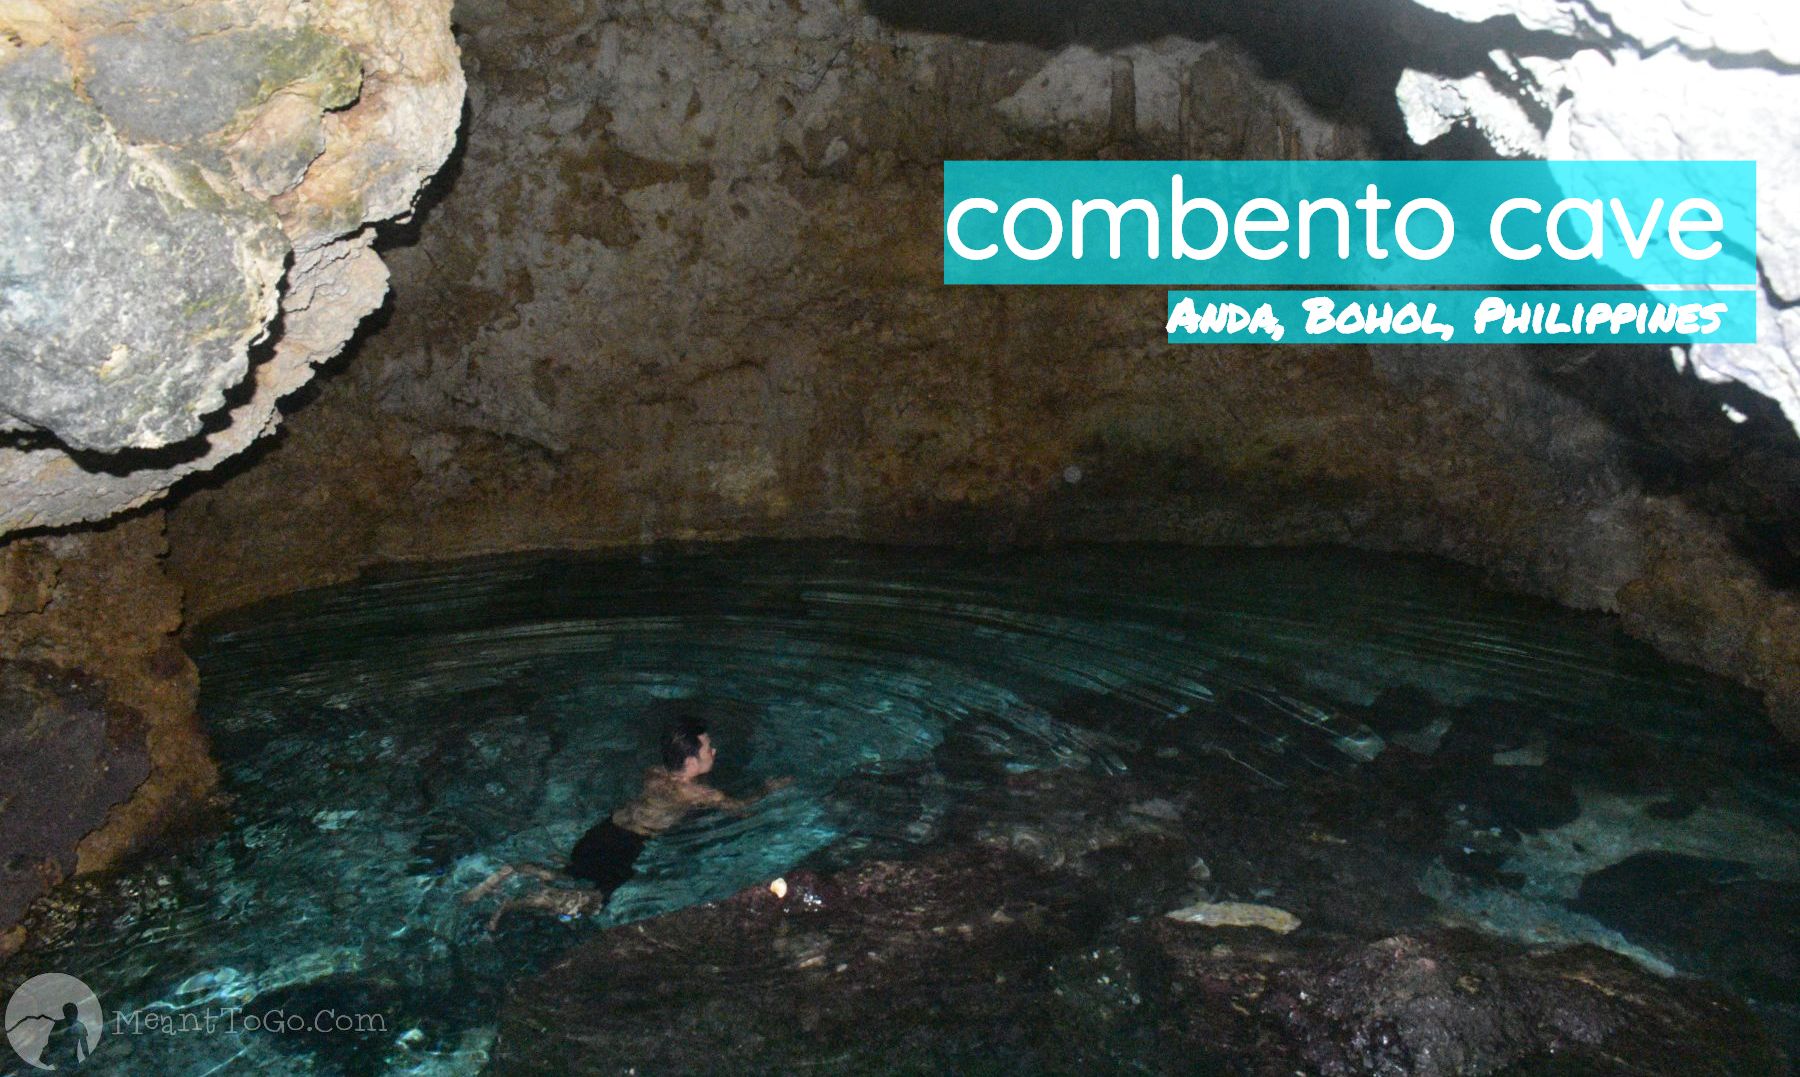 Combento Cave - Cave Pool in Anda, Bohol, Philippines